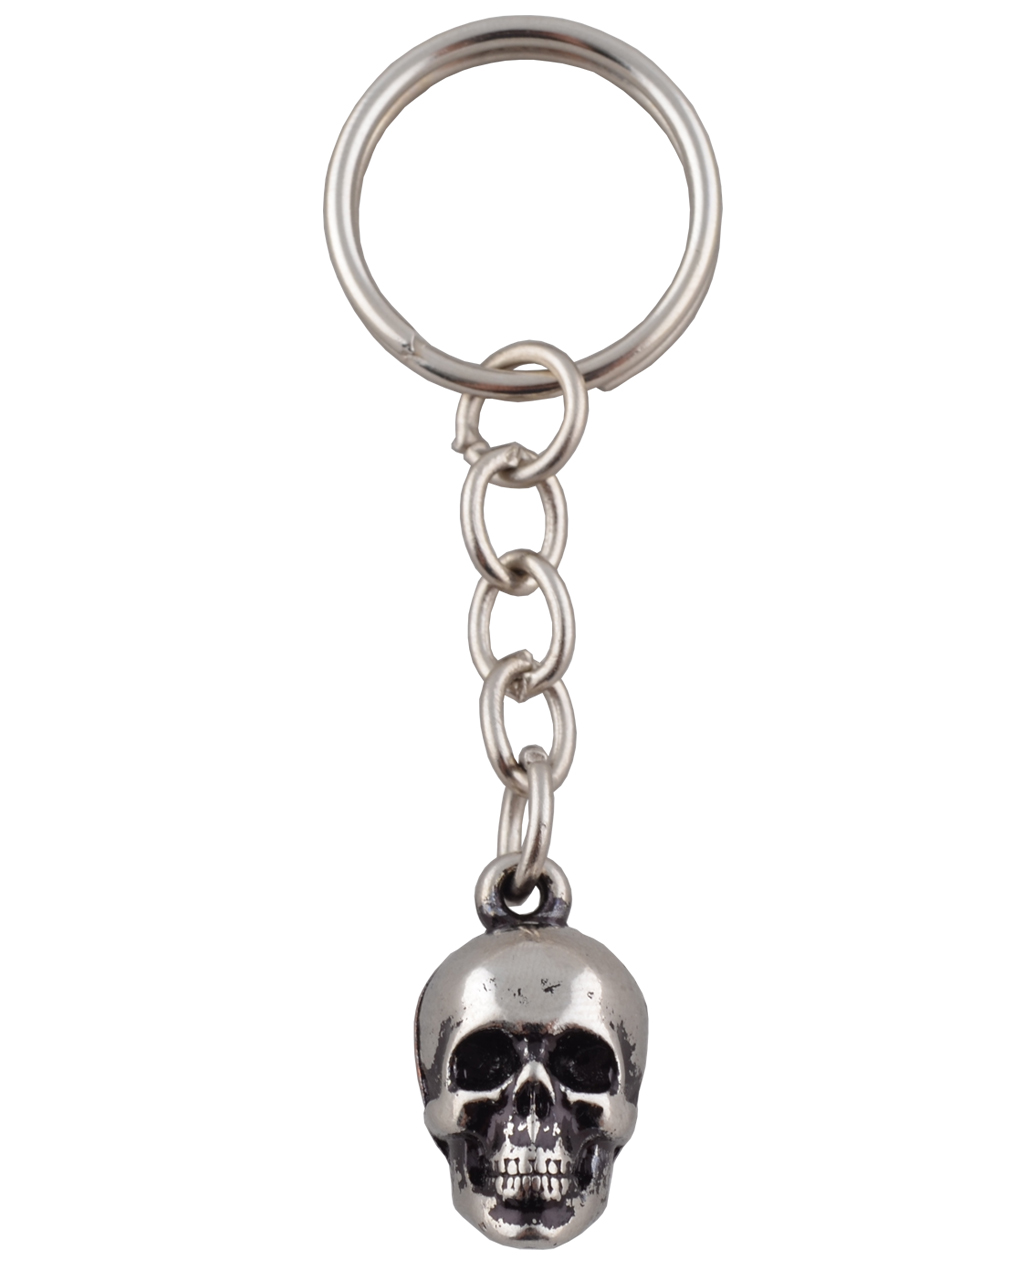 SCREAMING SKULL & Other Dead Things Retro Keychain; 1" domed charm fob; Key Ring 